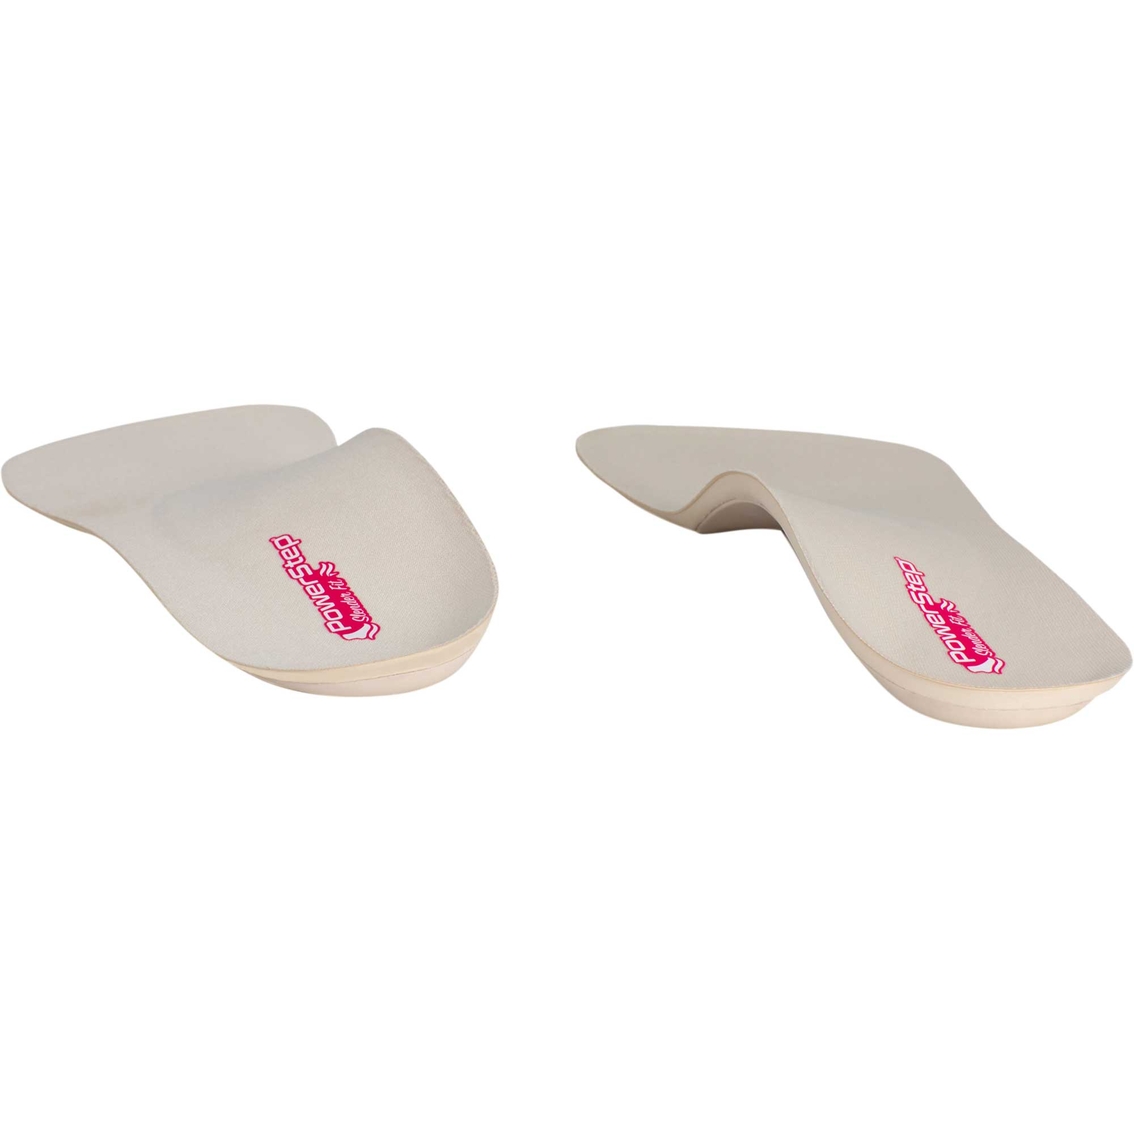 PowerStep Women's SlenderFit Fashion 3/4 Length Insoles - Image 7 of 10